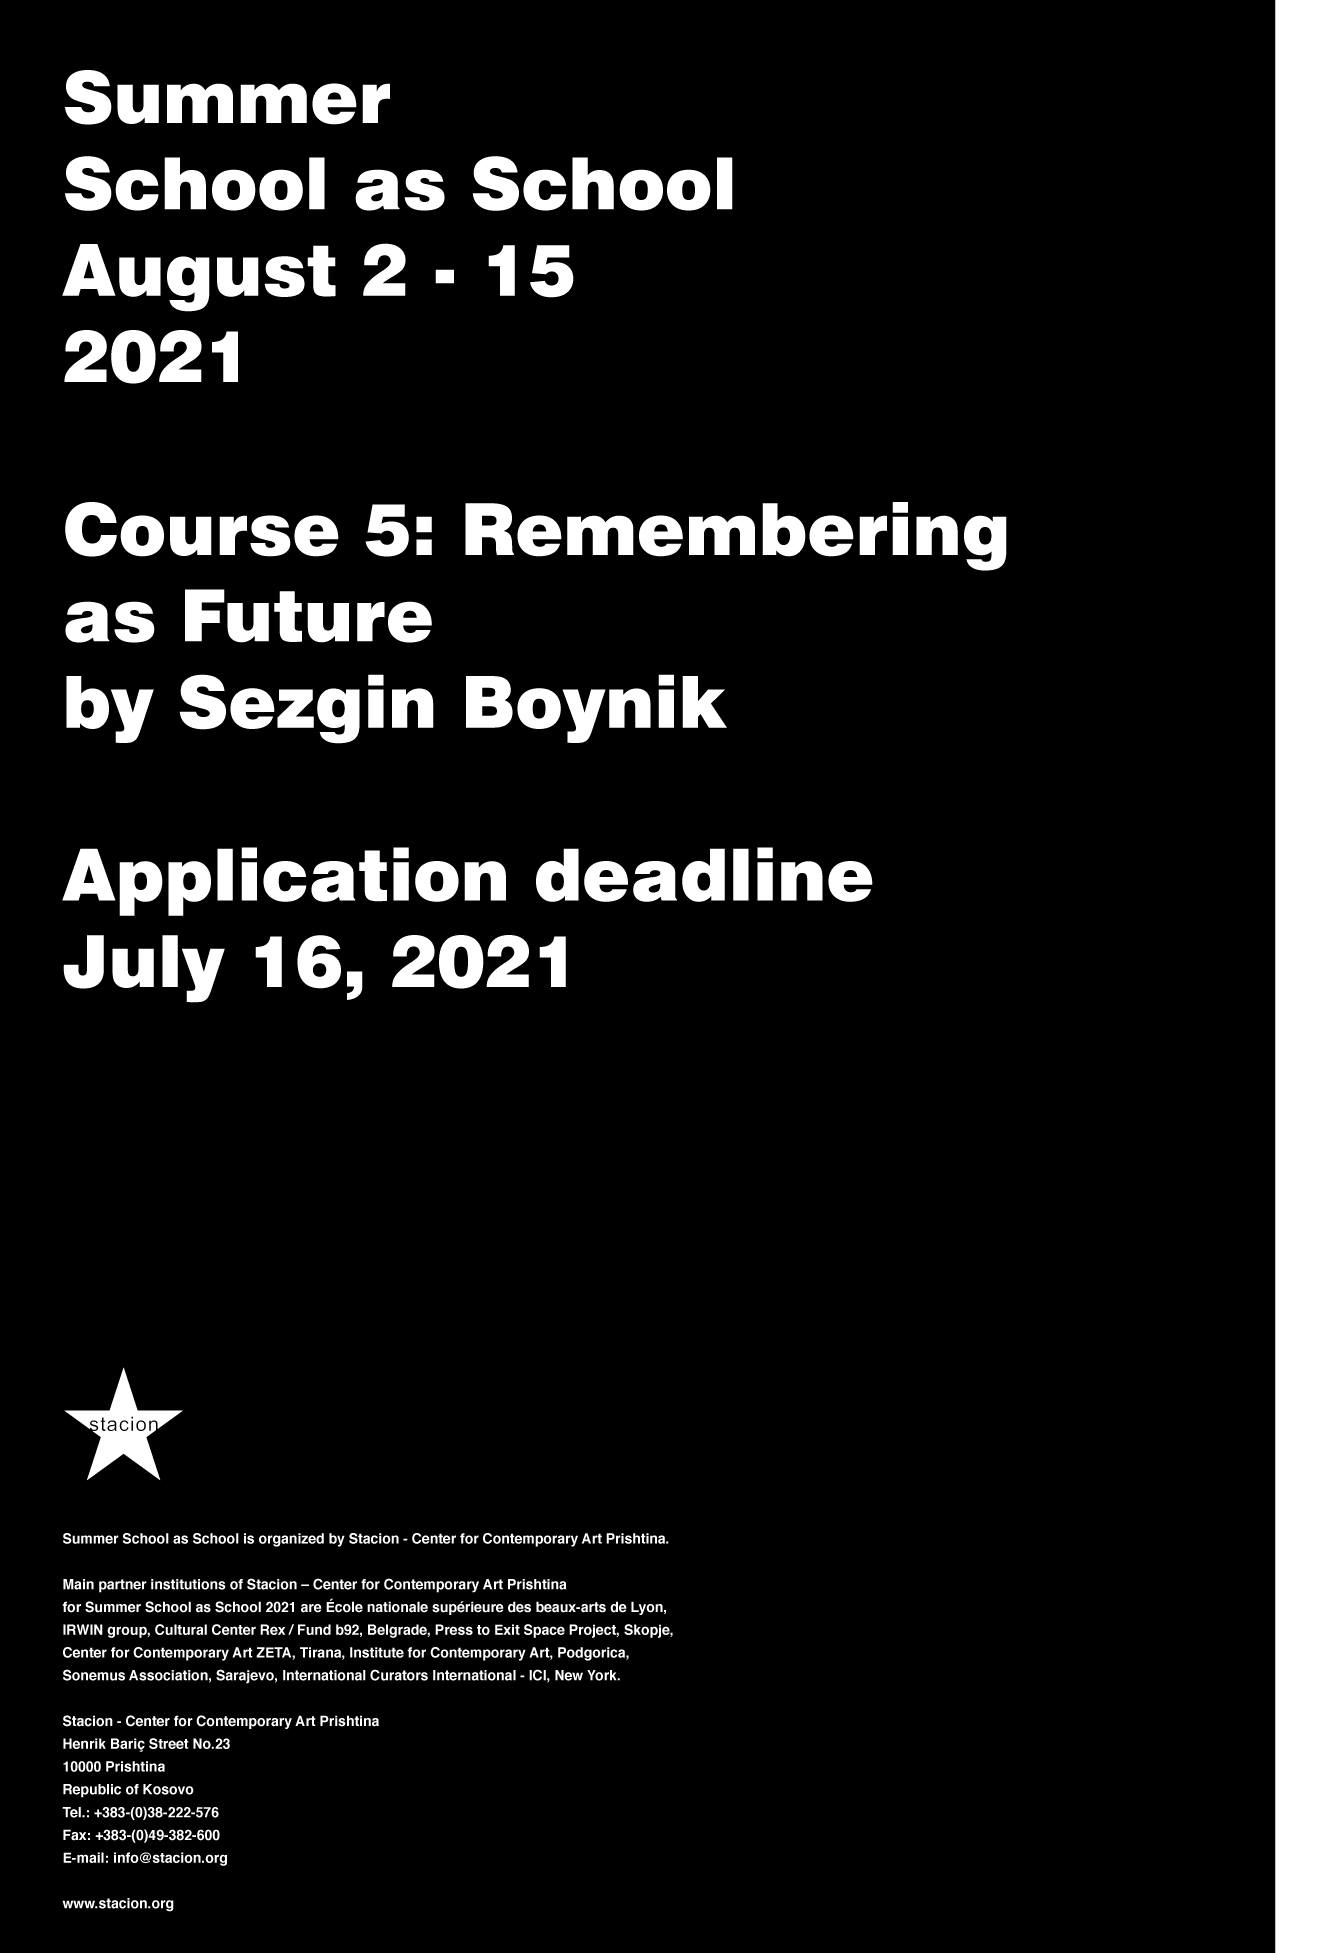 Course 5: Remembering as Future